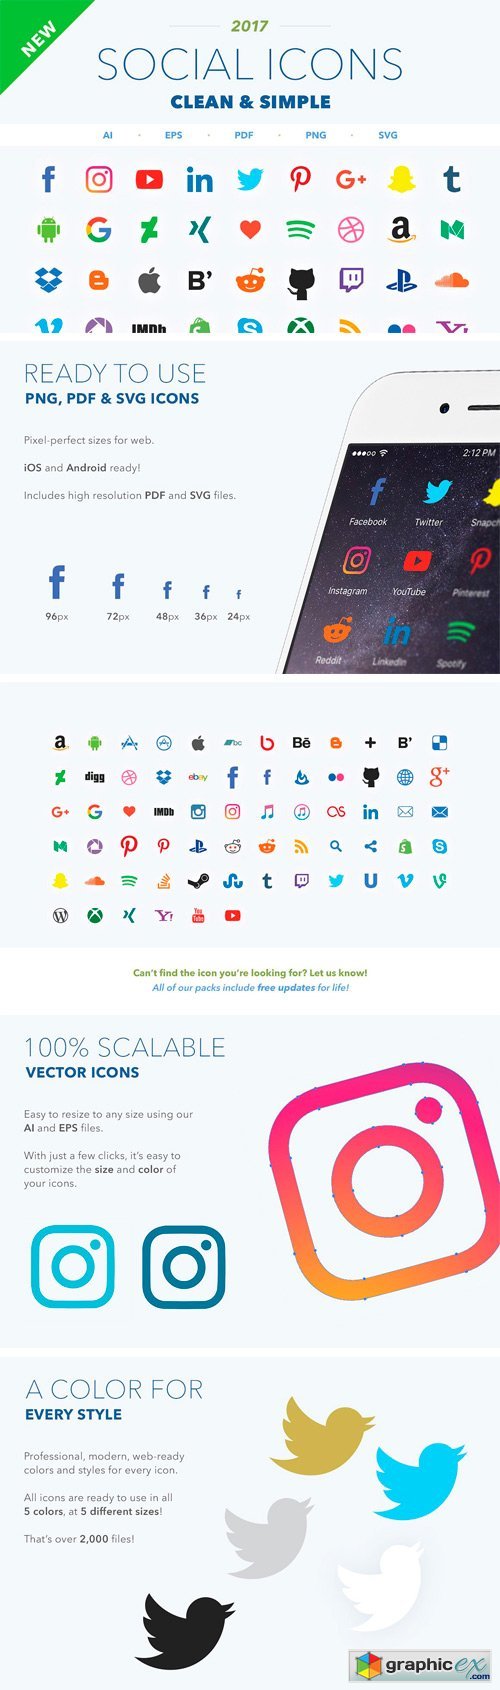 2017 Clean & Simple Social Icons